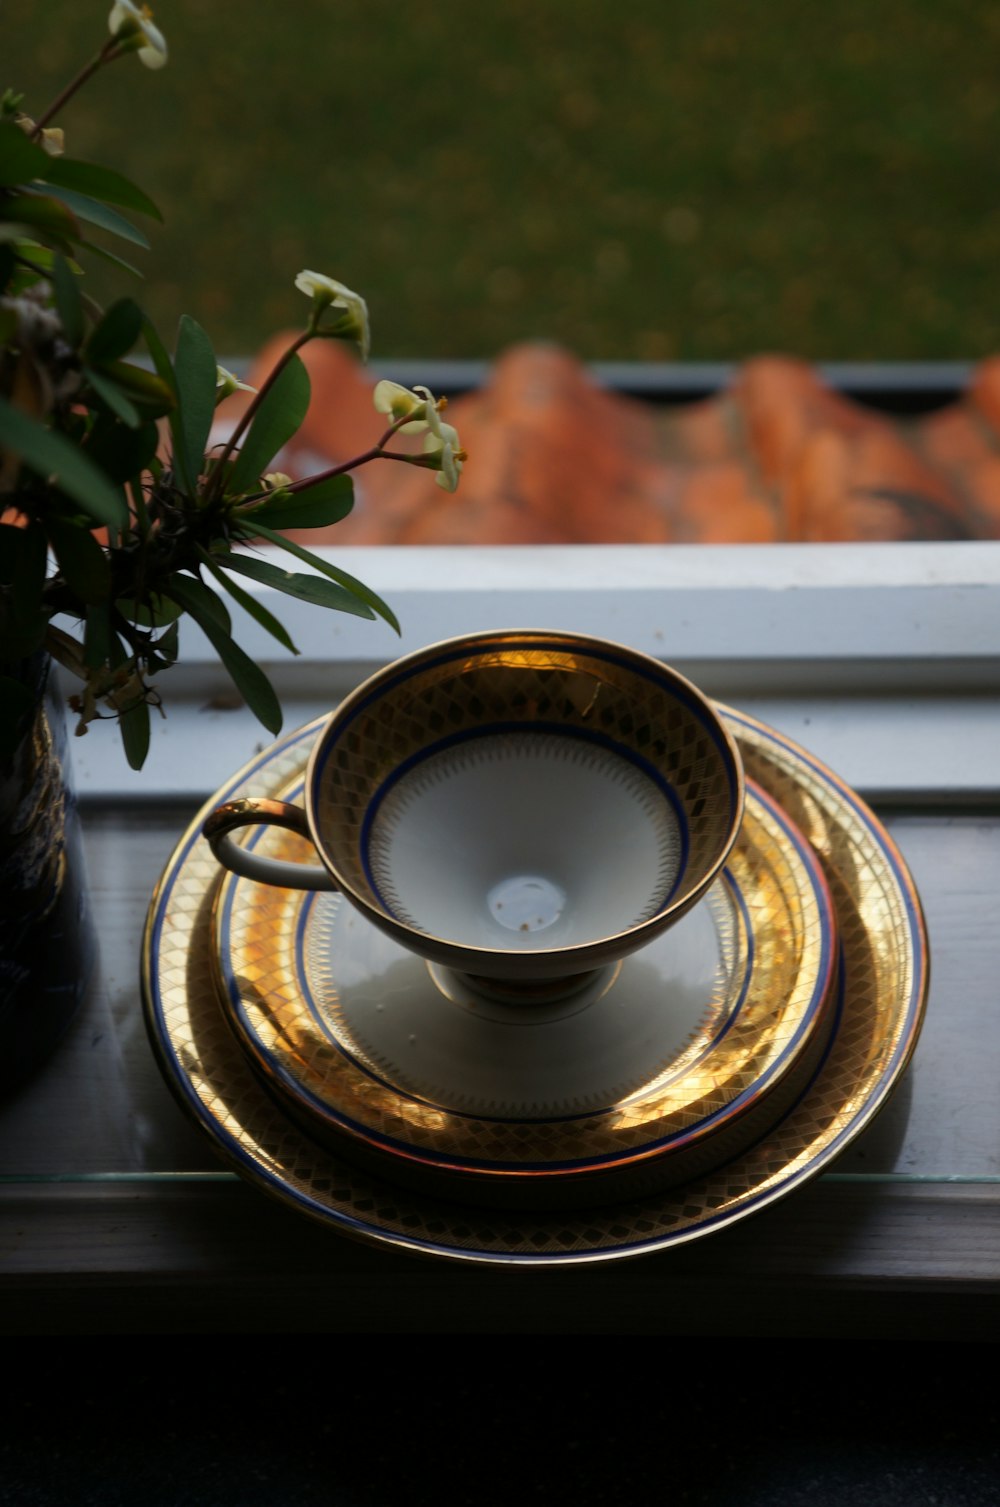 white and brown ceramic cup on saucer